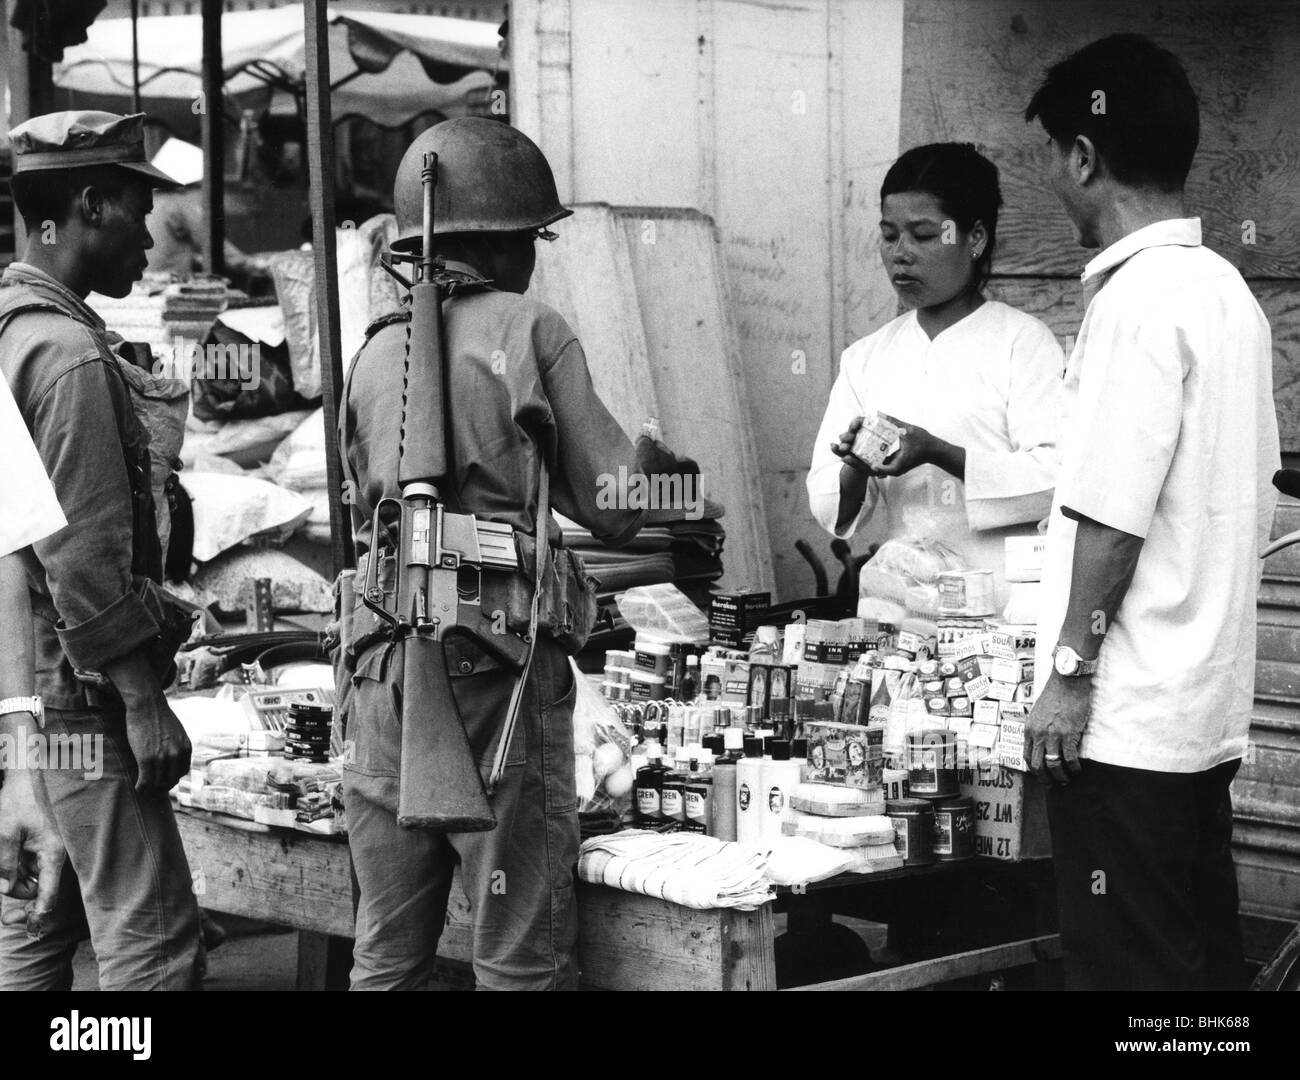 geography / travel, Vietnam, Phan Rang, street scenes, soldier shopping at a stall, 1972, soldiers, military, South-East Asia, Southeast Asia, Second Indochina War, 20th century, historic, historical, 1970s, 70s, Vietnam War, uniform, uniforms, assault rifle, M16, M 16, trader, traders, people, woman, men, trade, women, female, Stock Photo